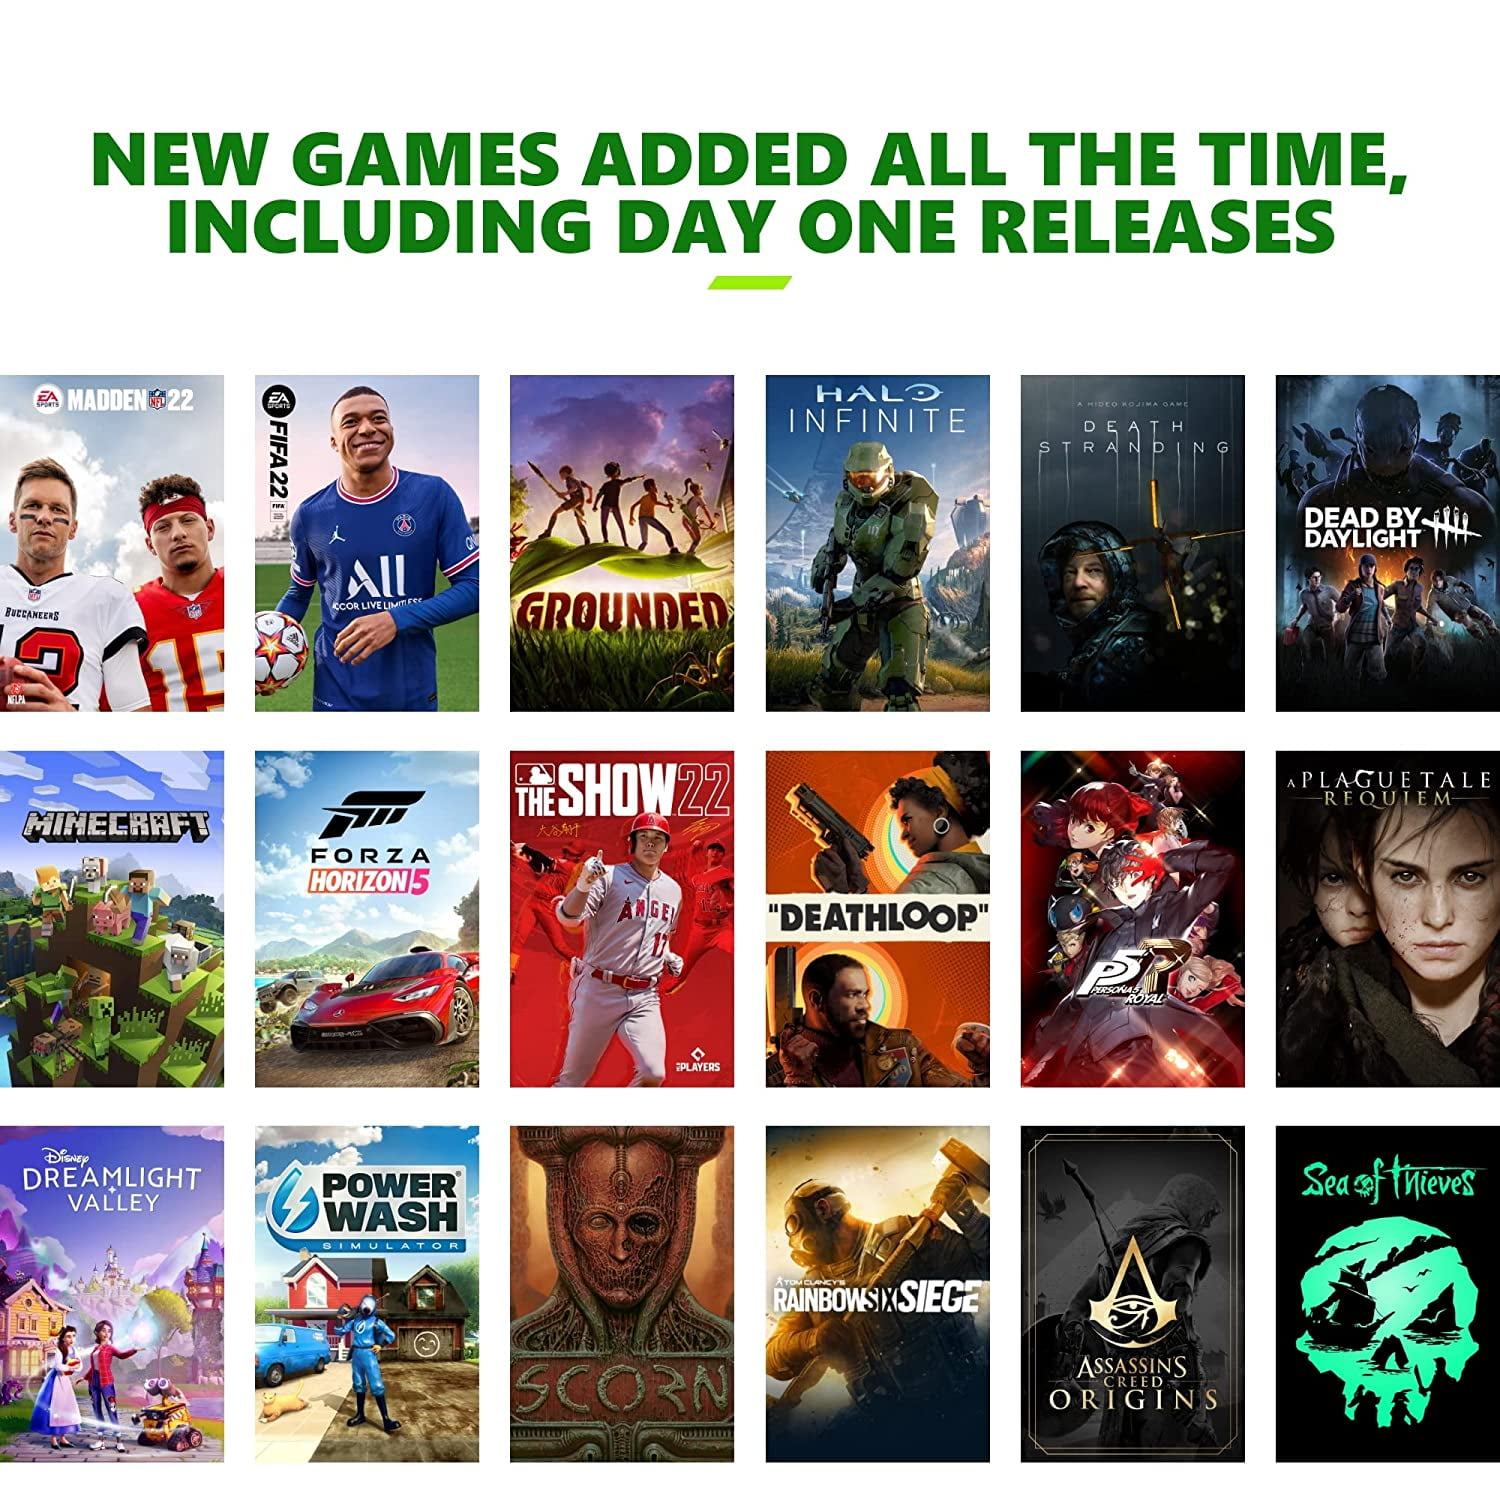 Xbox Game Pass Ultimate: 3 Month Membership - Physical Card with